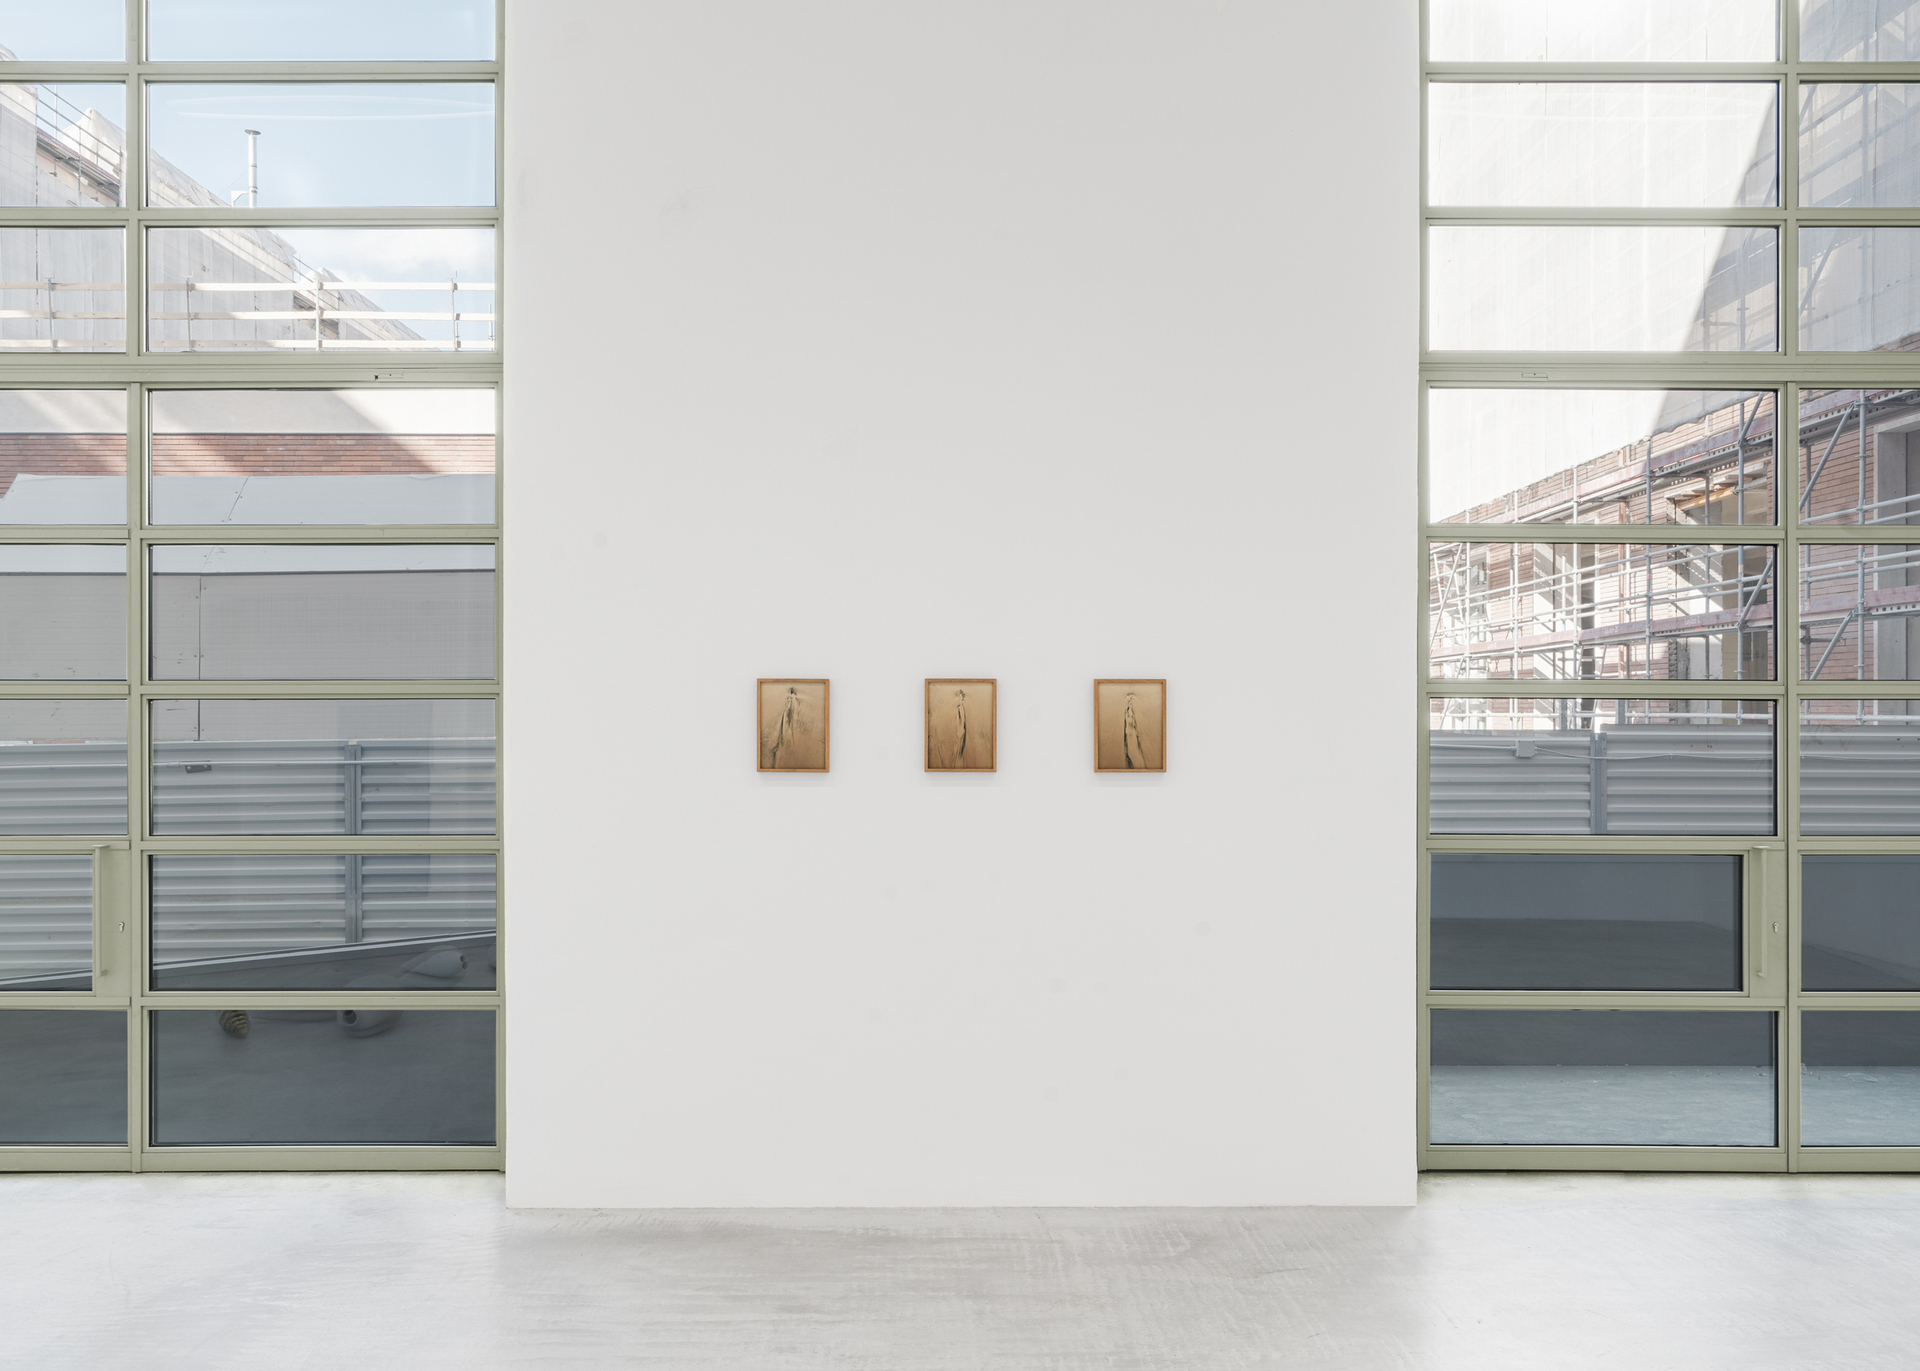 Eva Löfdahl, Untitled, 2021. 		New and vestigial traits, installation views at VEDA, Florence, 2022. 		Courtesy the artist and VEDA, Florence. Images: Flavio Pescatori.